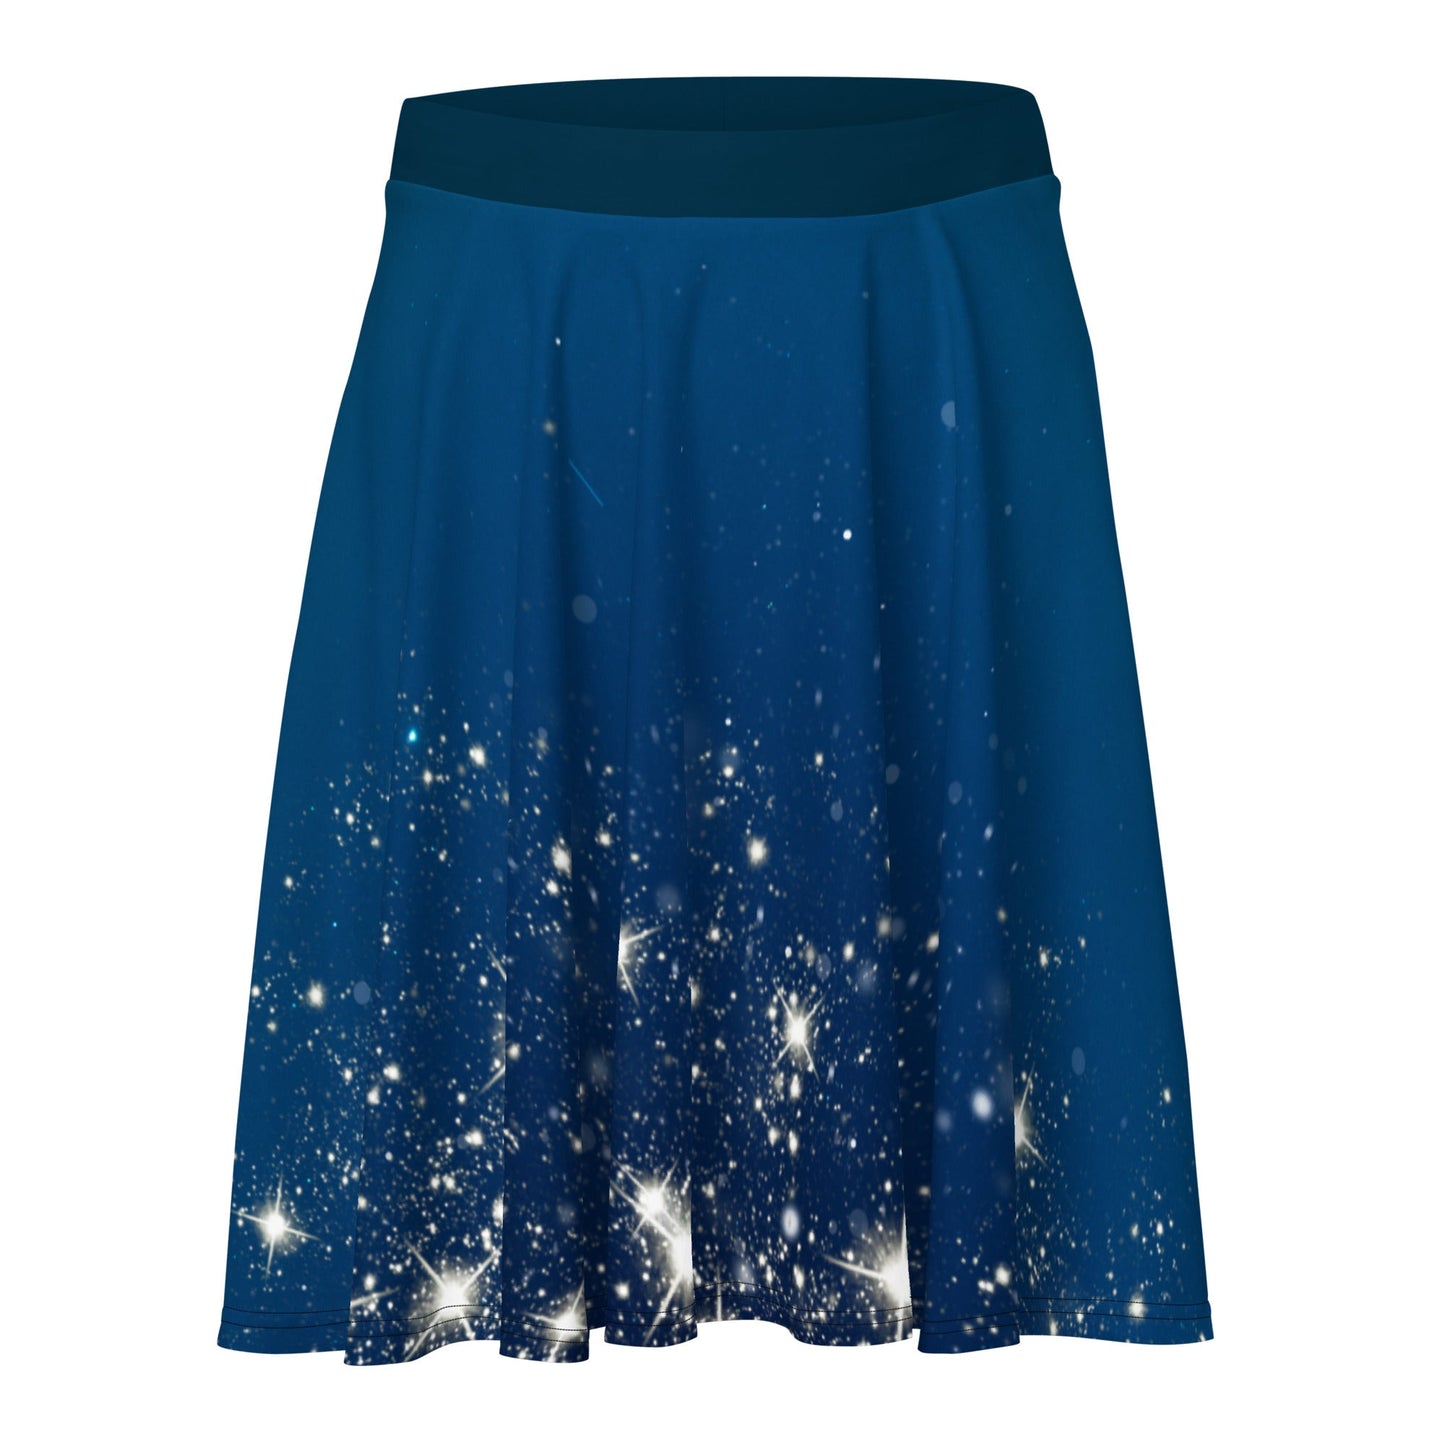 The Evangeline Skater Skirt coordinating stylecouples costumesdisney couples style#tag4##tag5##tag6#